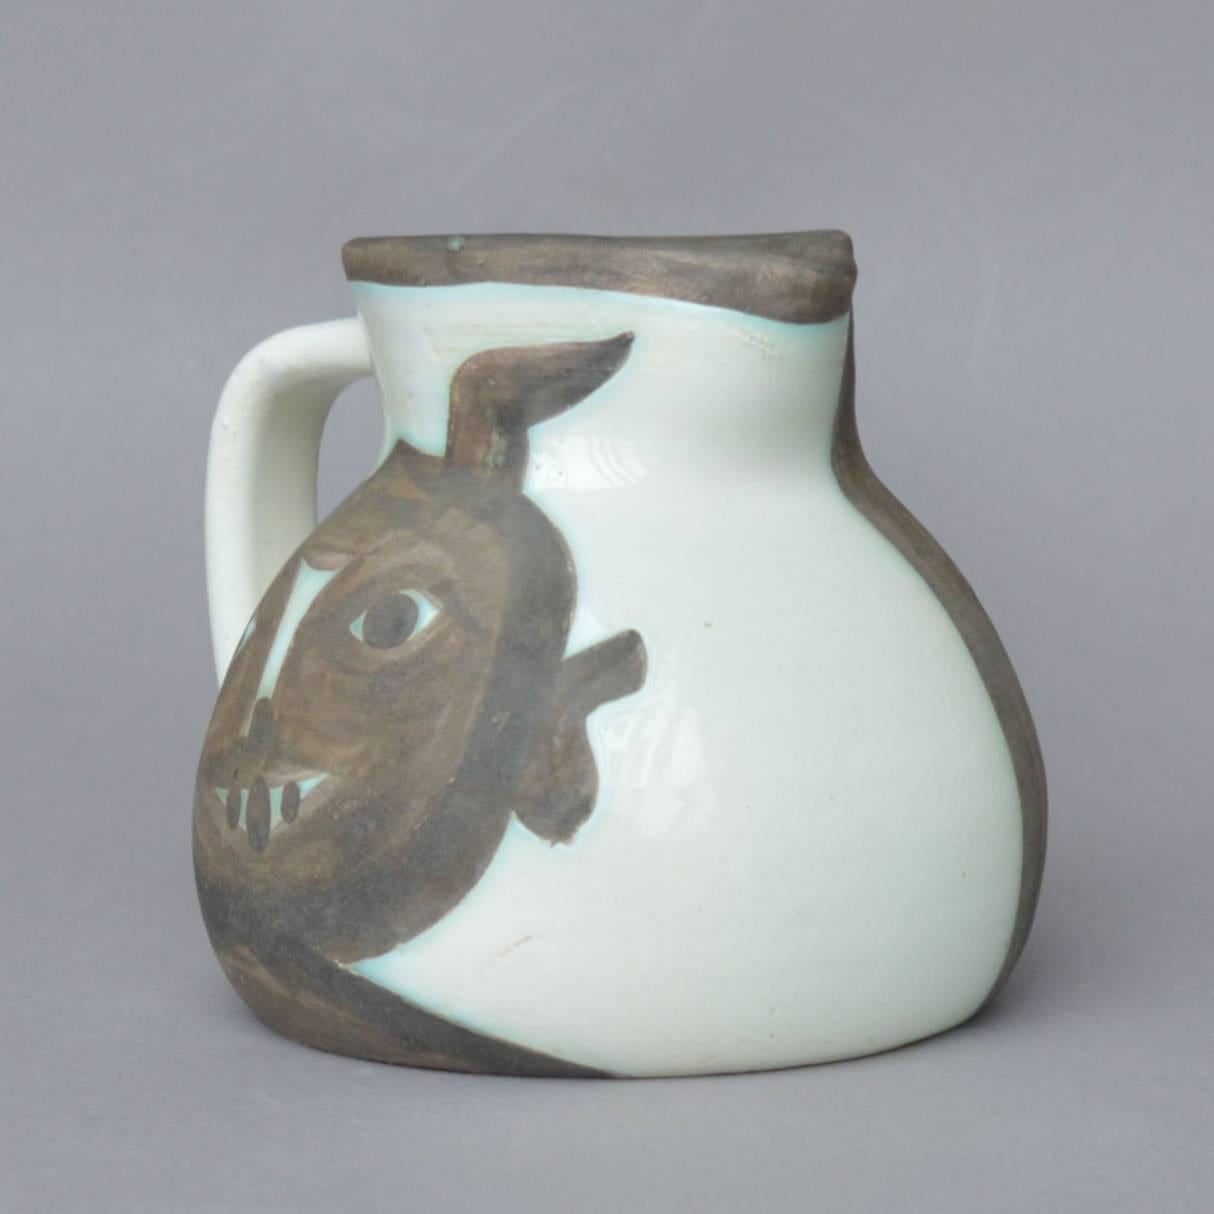 Pablo Picasso turned ceramic pitcher heads (